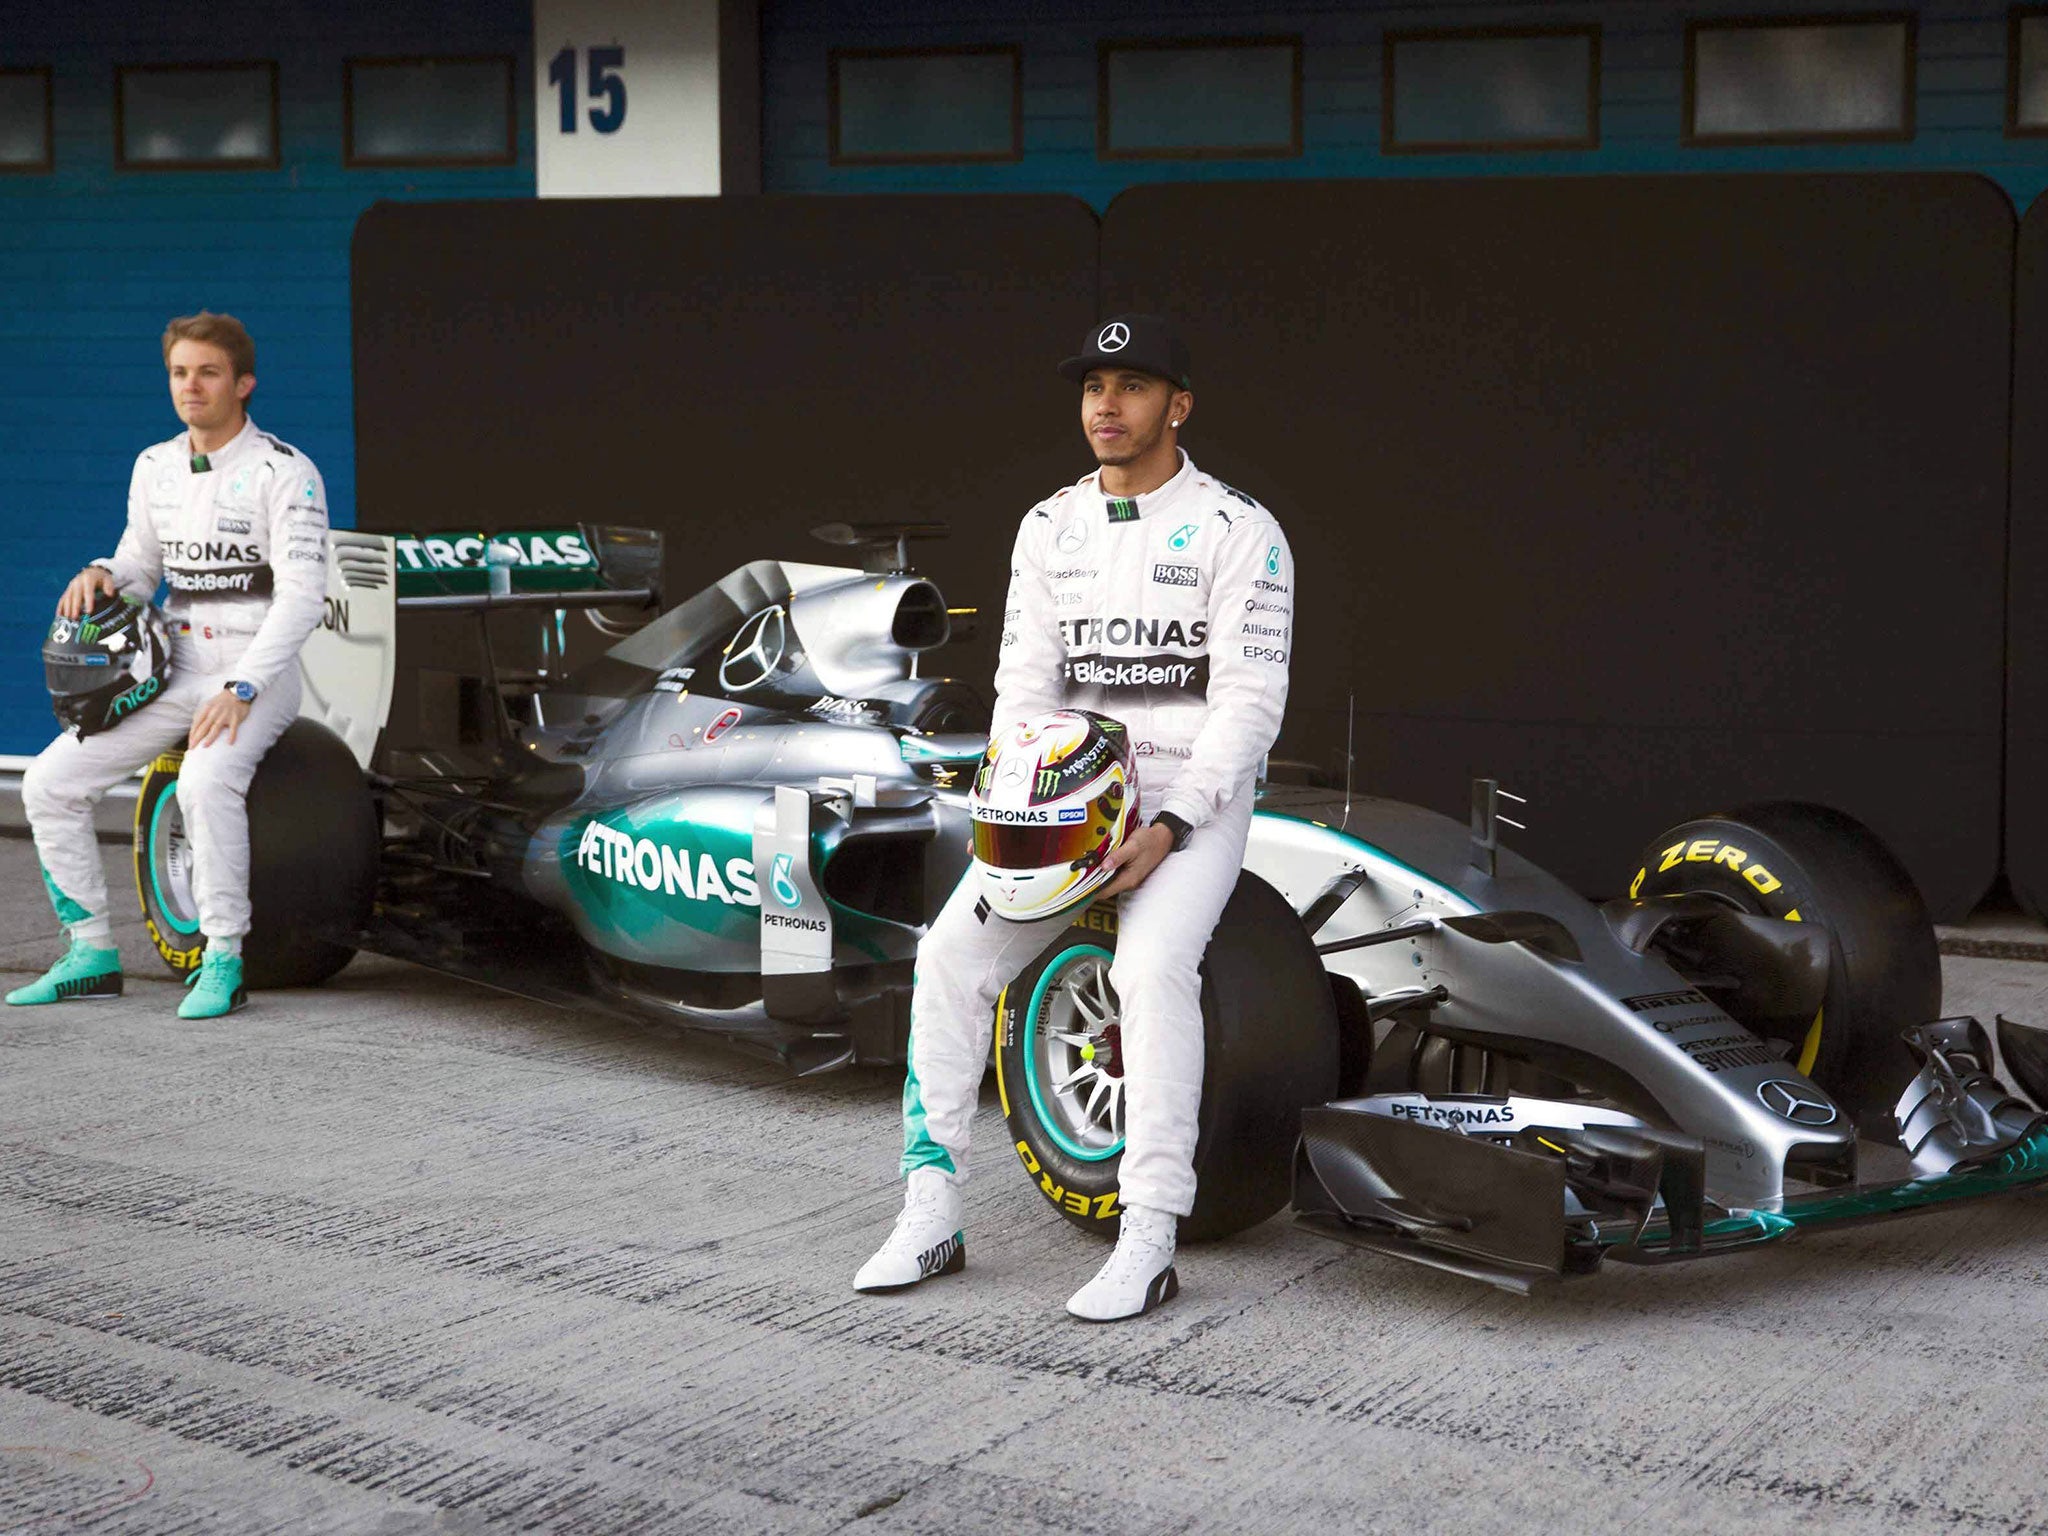 Lewis Hamilton, right, and Nico Rosberg pose with the new Mercedes W06 car in Spain